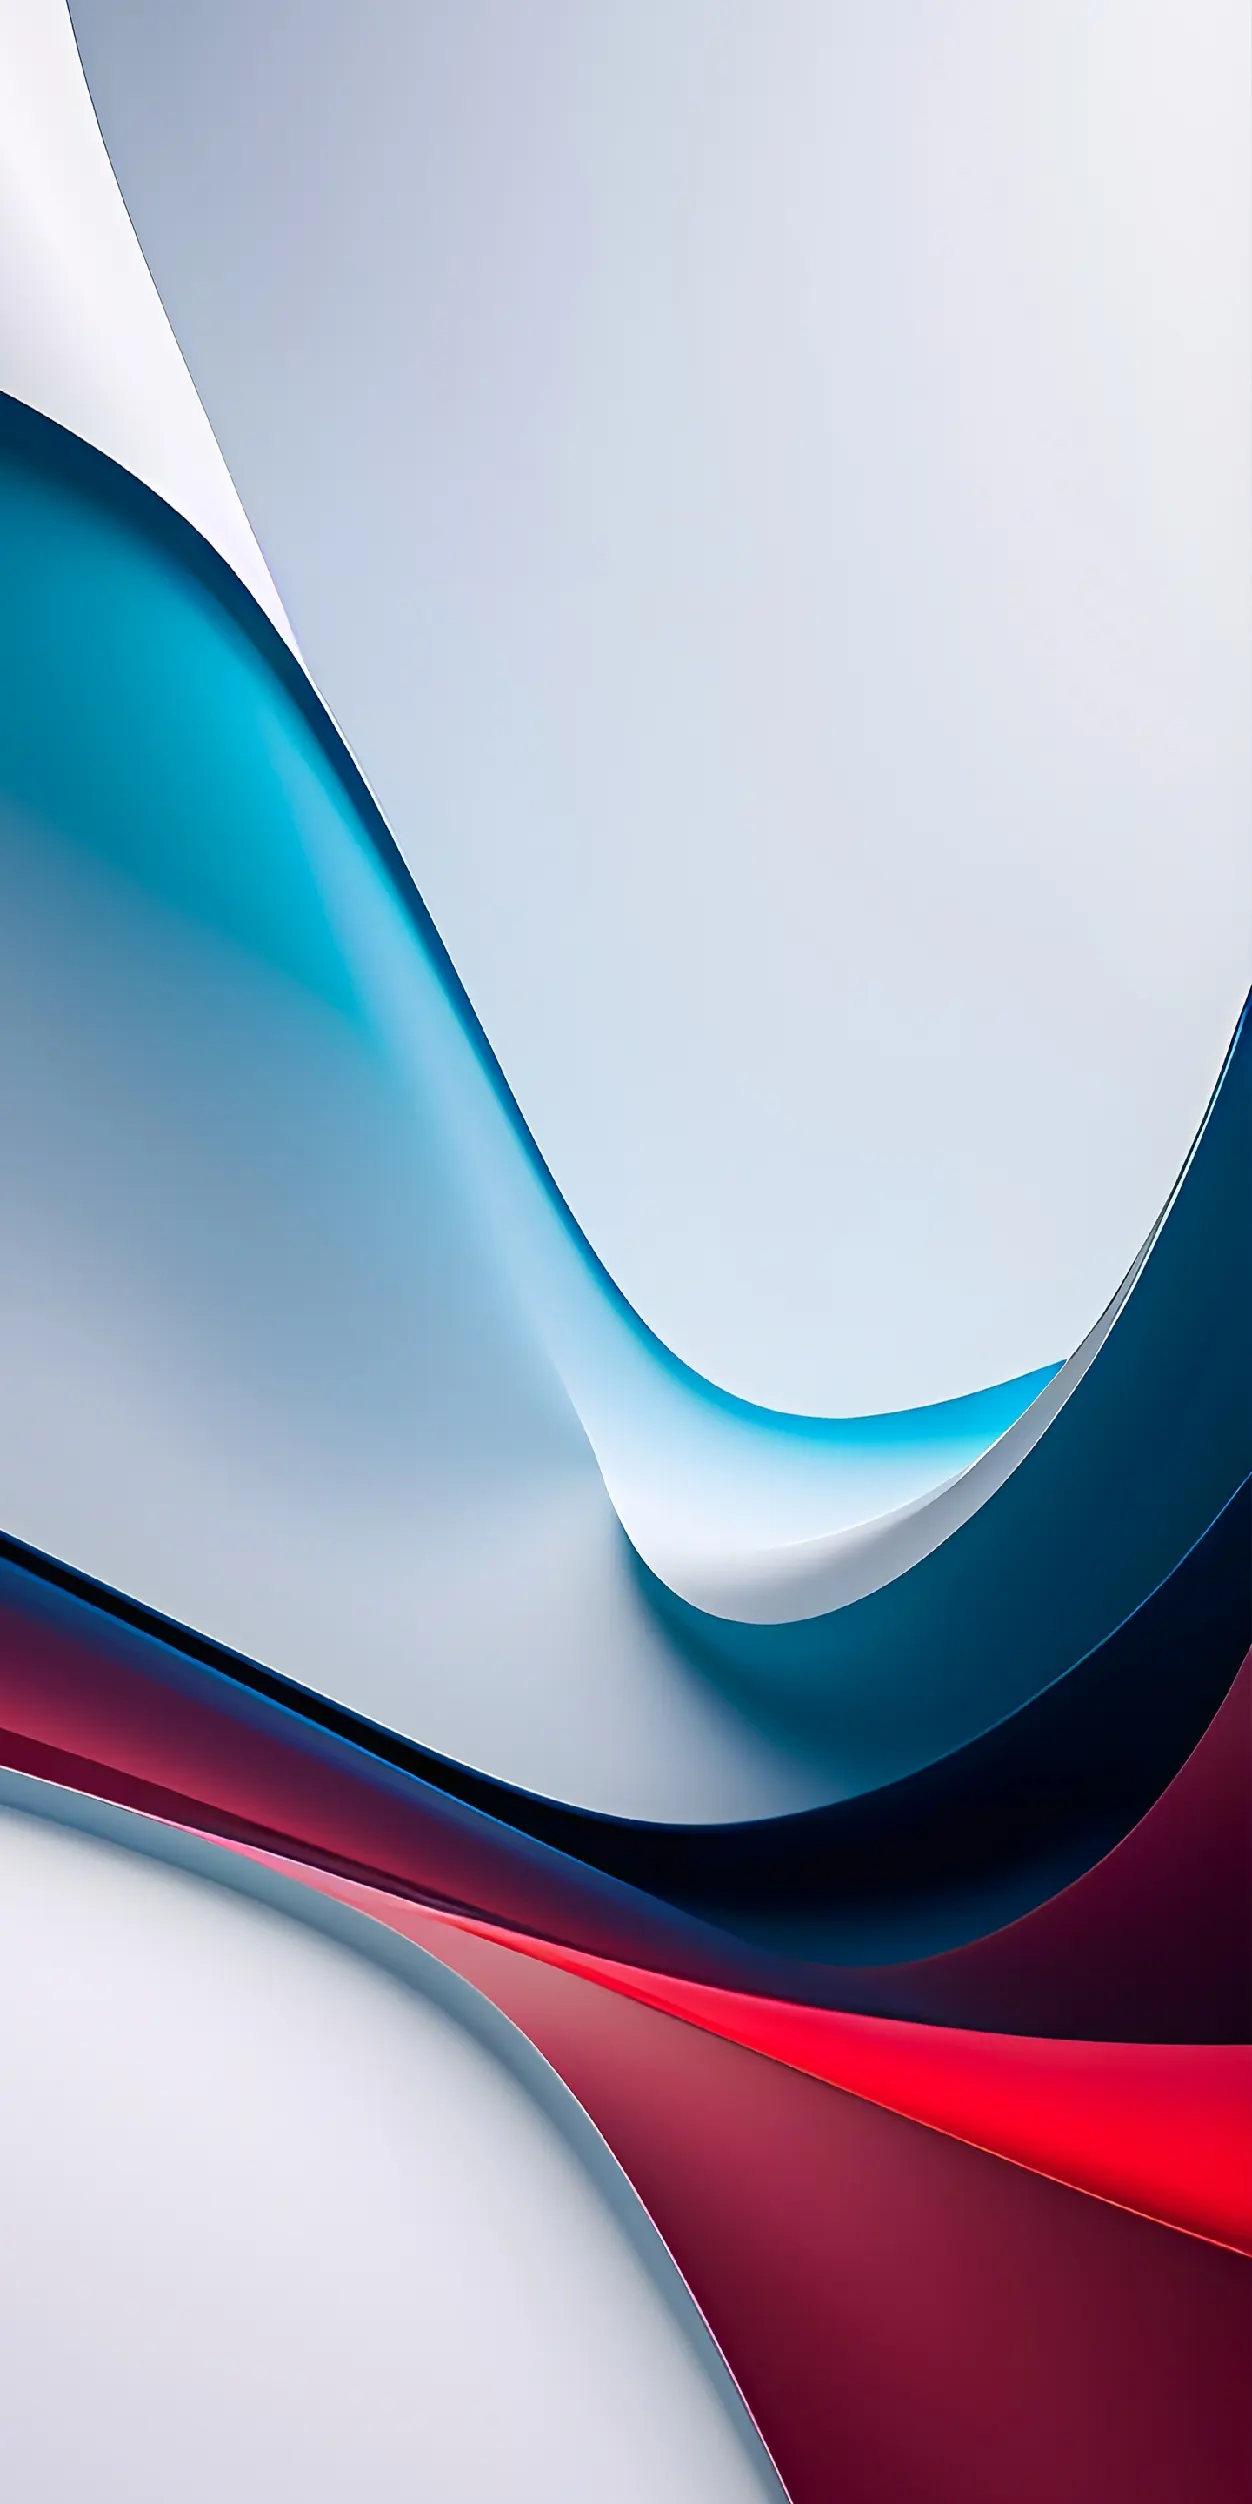 Abstract iPhone wallpaper - 078